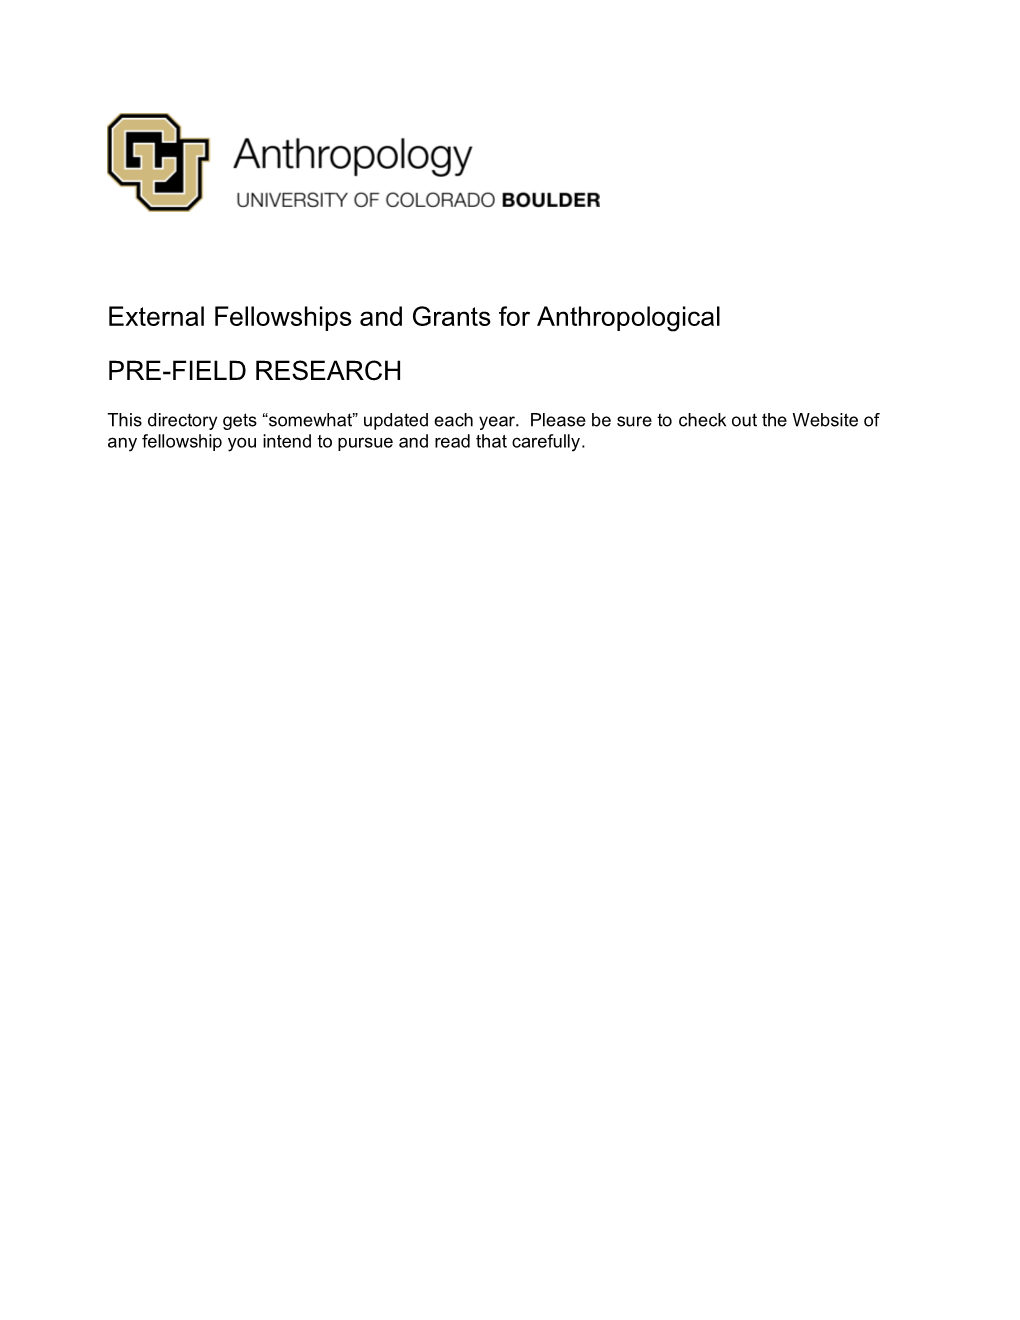 External Fellowships and Grants for Anthropological PRE-FIELD RESEARCH